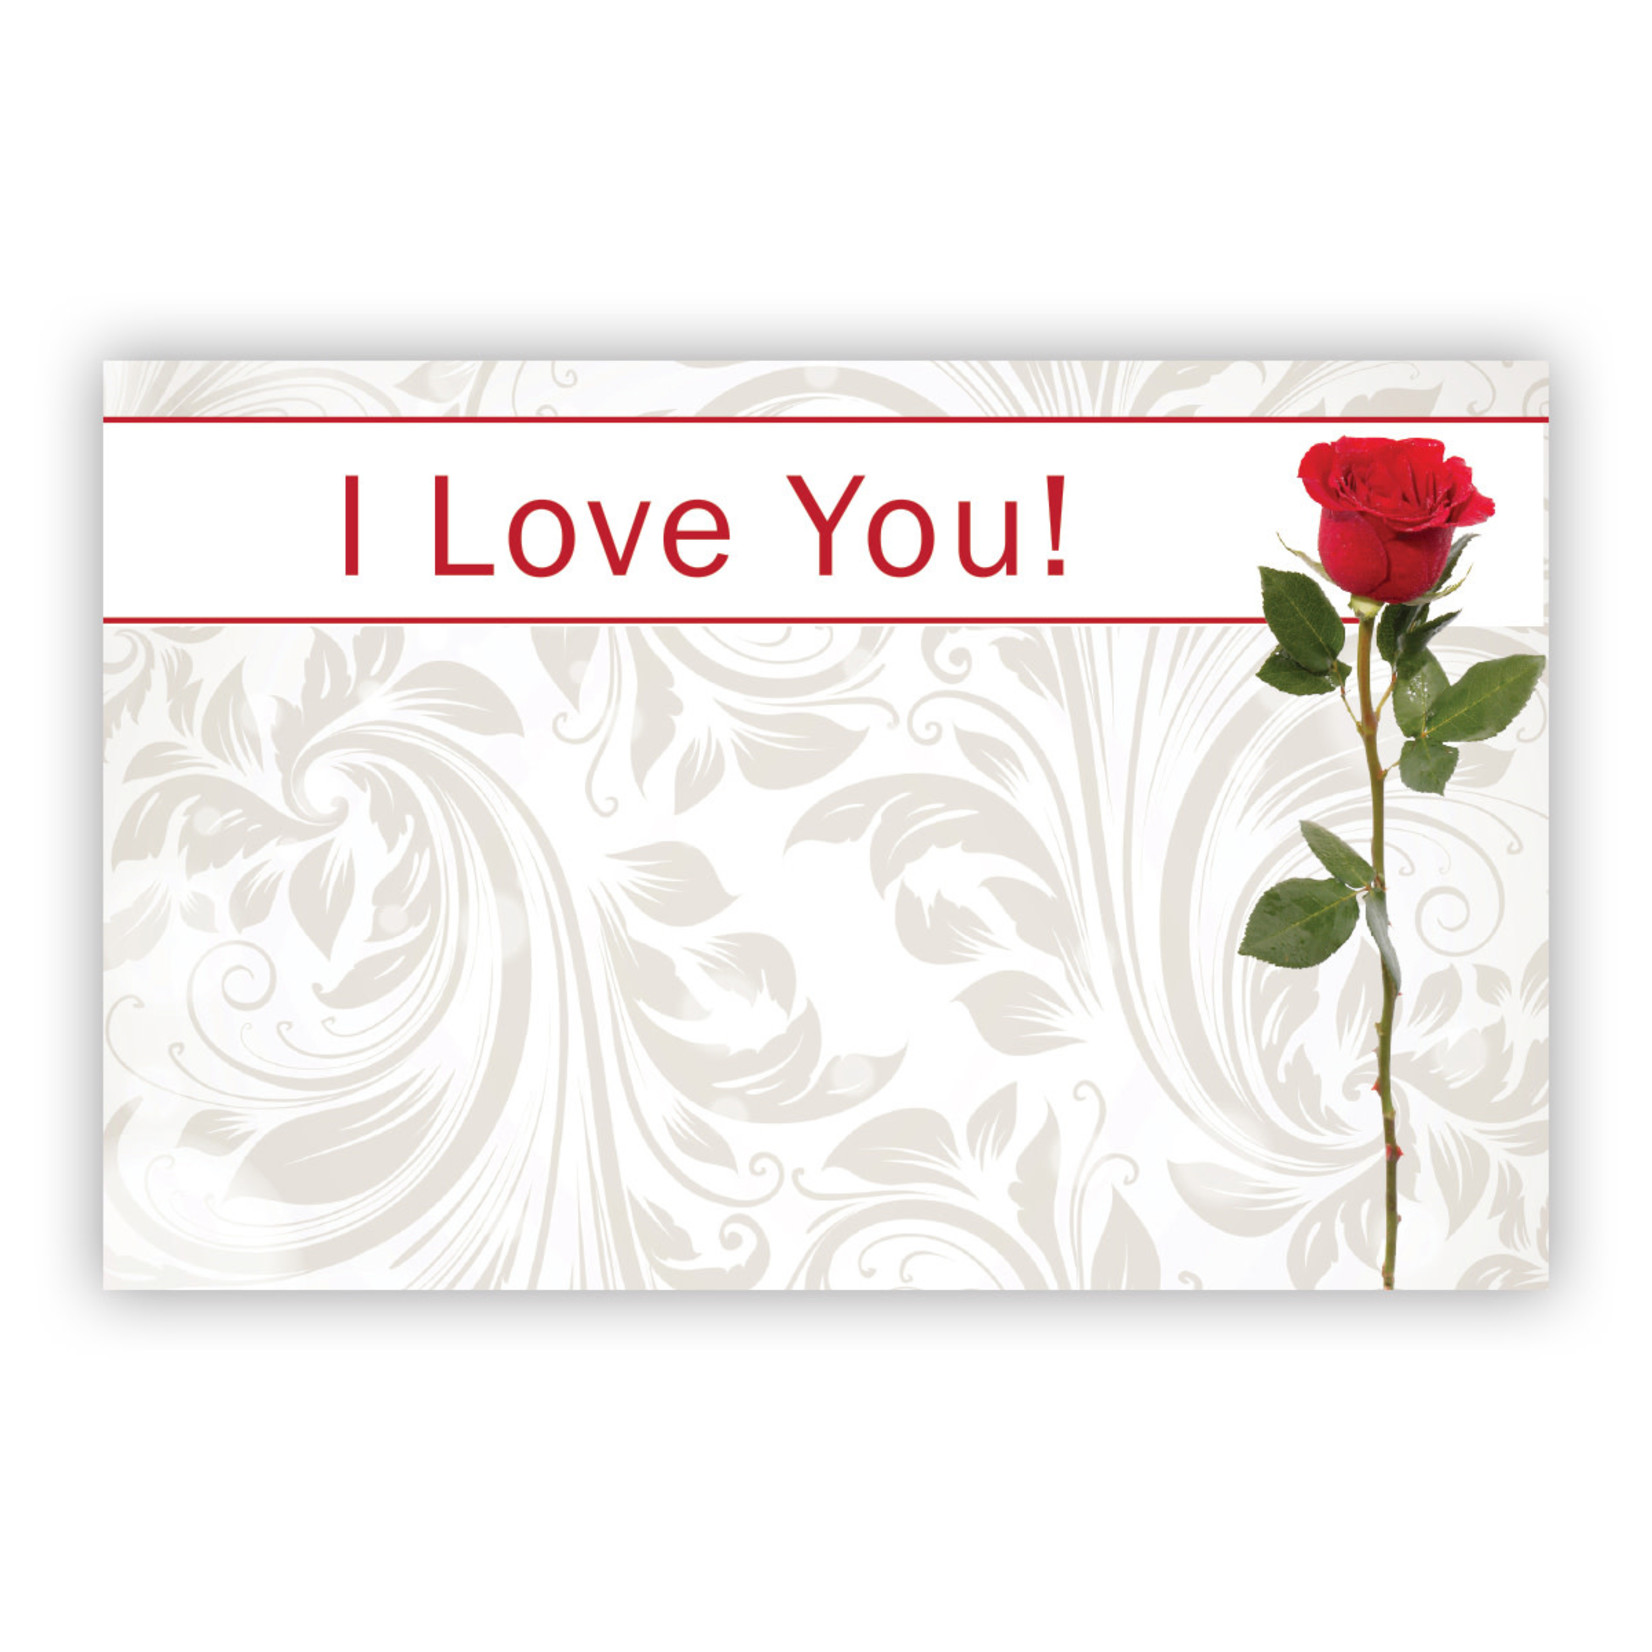 "I Love You" Single Red Rose